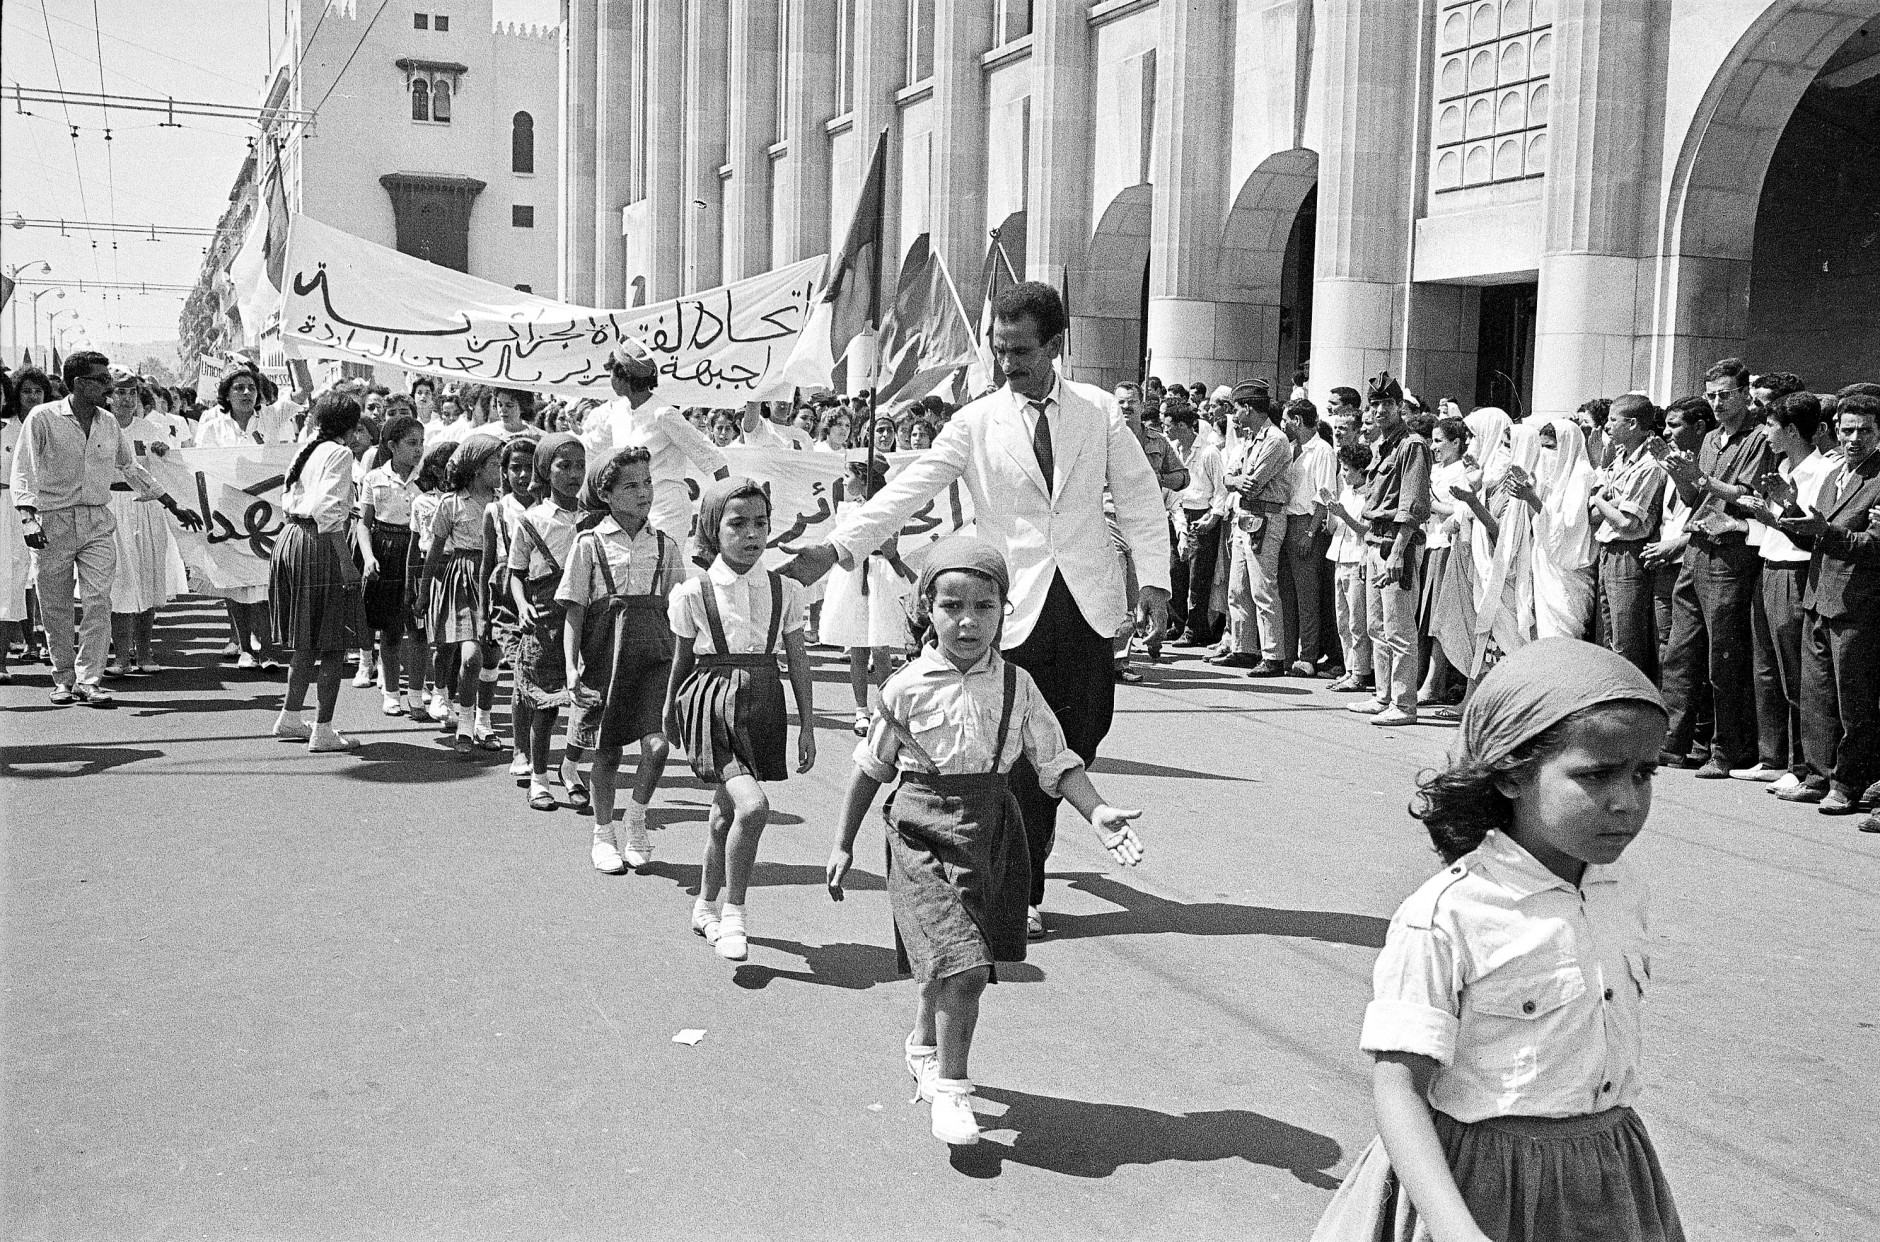 Muslim children march in a parade during official independence celebrations in Algiers, Algeria, on July 5, 1962.  The majority of Algerians voted for independence from French colonial rule in the nation-wide referendum held July 1.  (AP Photo)